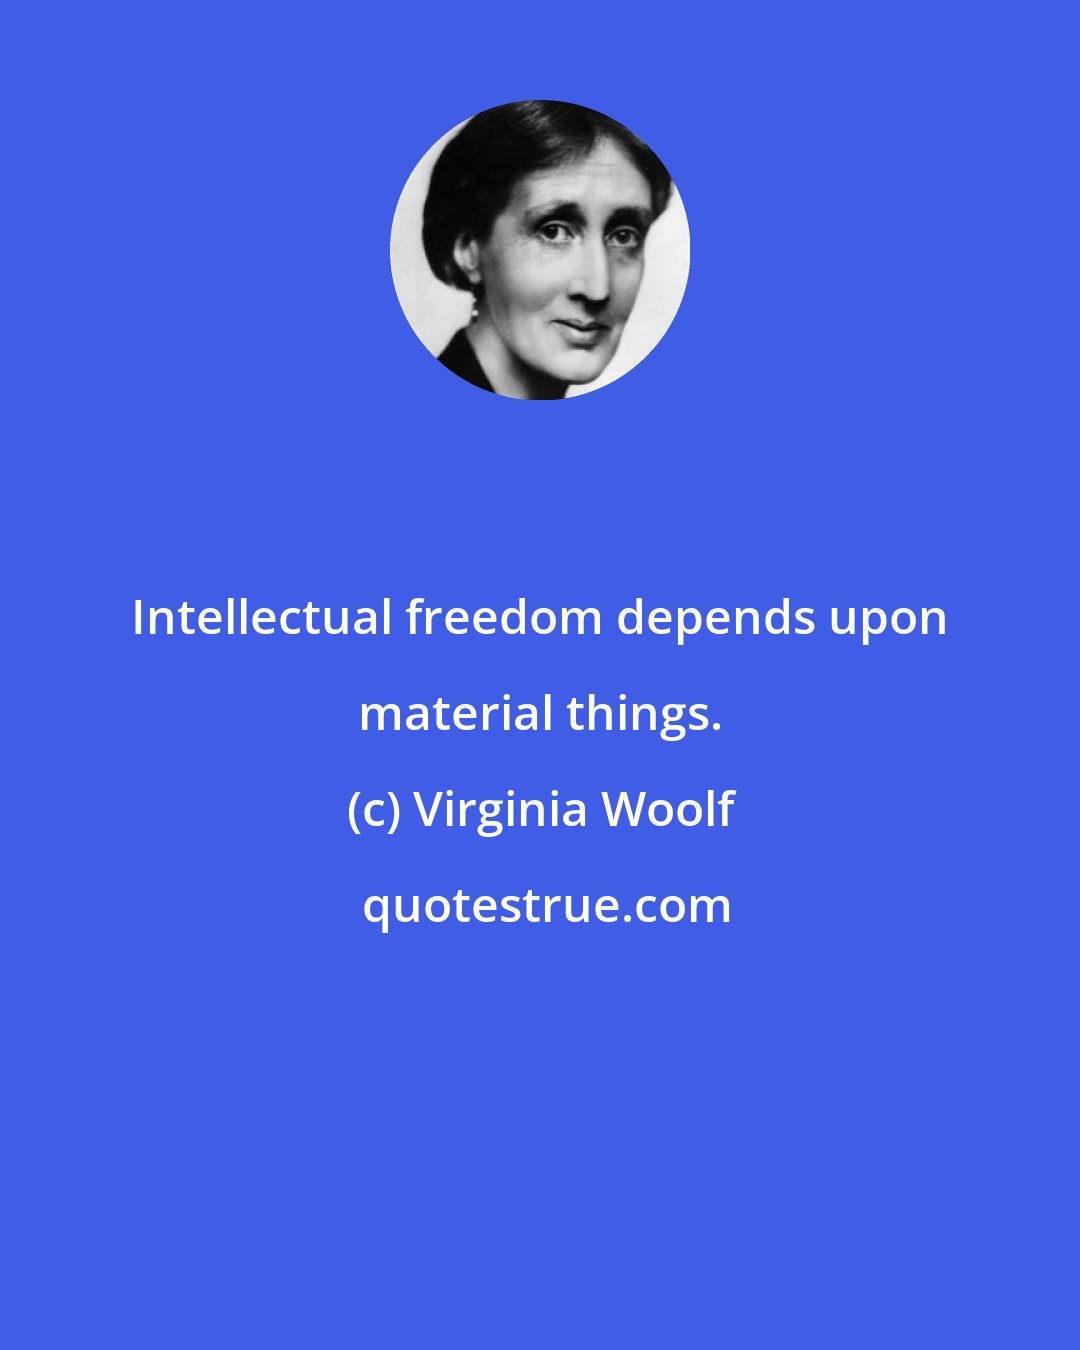 Virginia Woolf: Intellectual freedom depends upon material things.